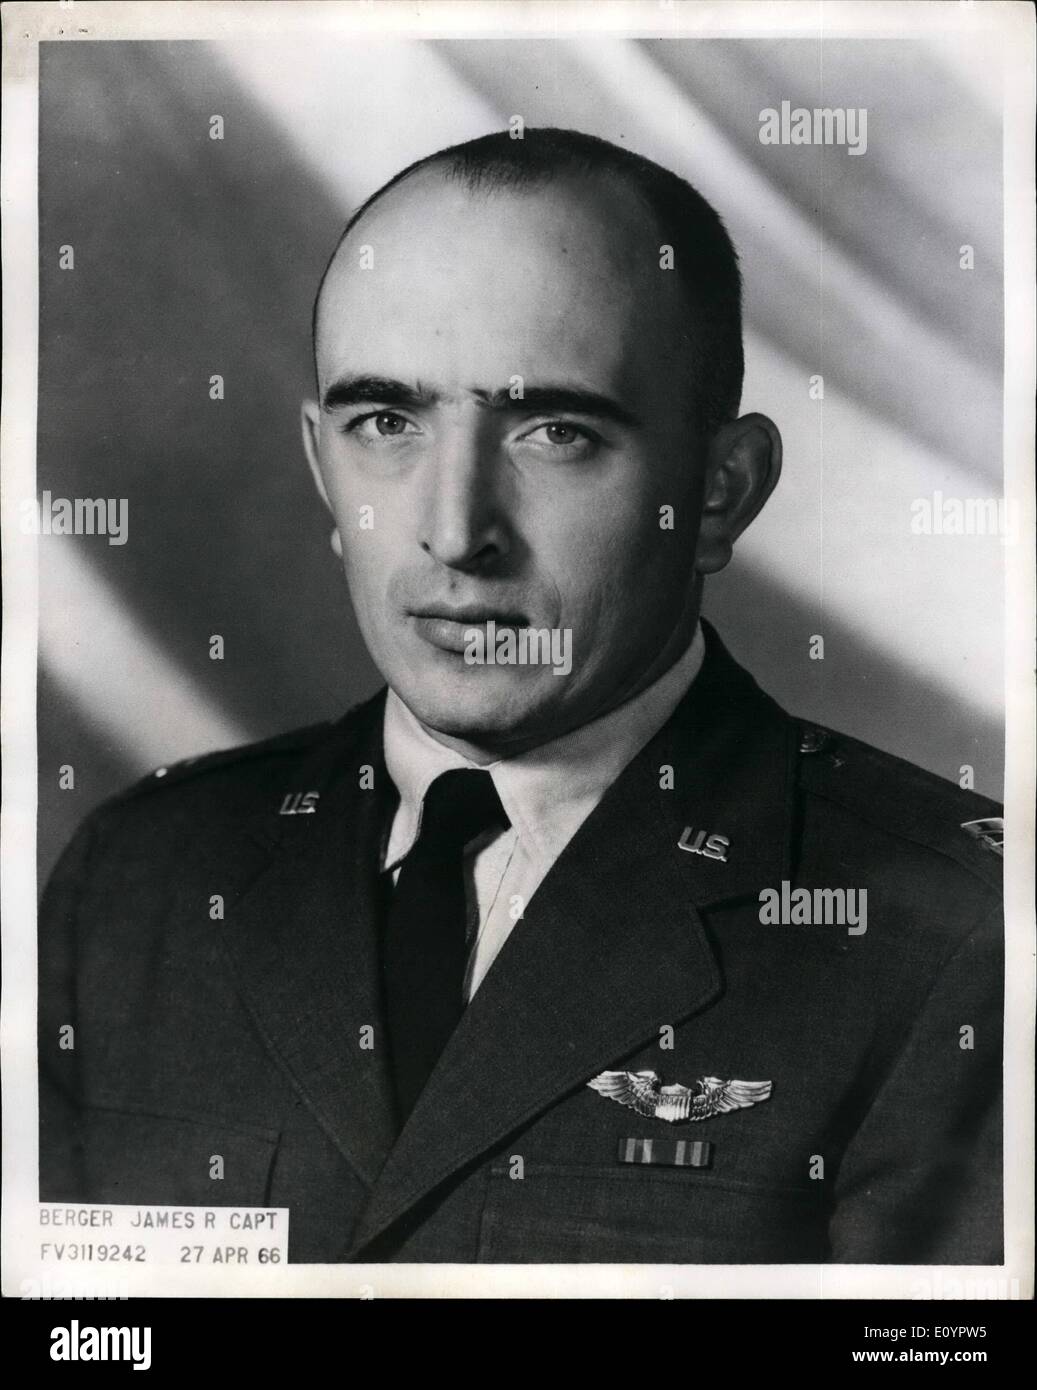 Mar. 03, 1971 - Captain James Robert Berger-U.S. Air Force-FV 3119242 originally from Richmond, Virginia. Born November 6, 1938, Graduated from Thomas Jefferson high school 1957, Graduated from VMI 1961, played in Band at TJ and VMI-Cheerleader at VMI attended Grove Avenue Baptist Church and sand in Choir in National guard for 2 year, wife, Carol, and 2 children-Billy, 7 , Scott, 5-live in Lexington, Virginia, His aunt. Mrs. Marie Williams, lives in Richmond, Virginia-she raised Jimmy, shot down December 2, 1966 over Hanoi. Stock Photo